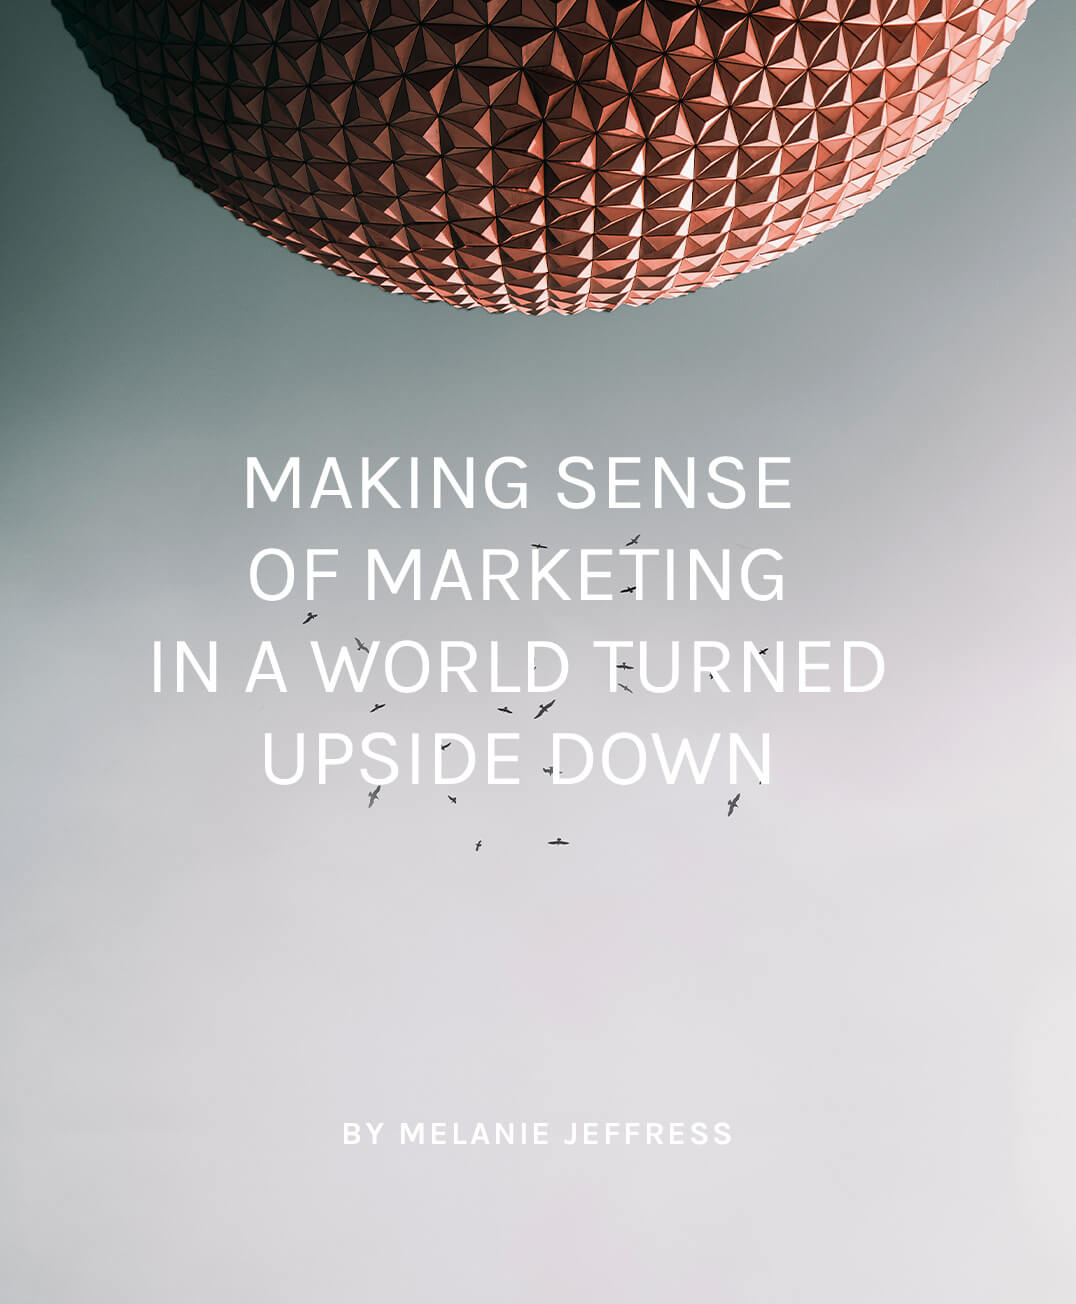 Making sense of marketing in a world turned upside down